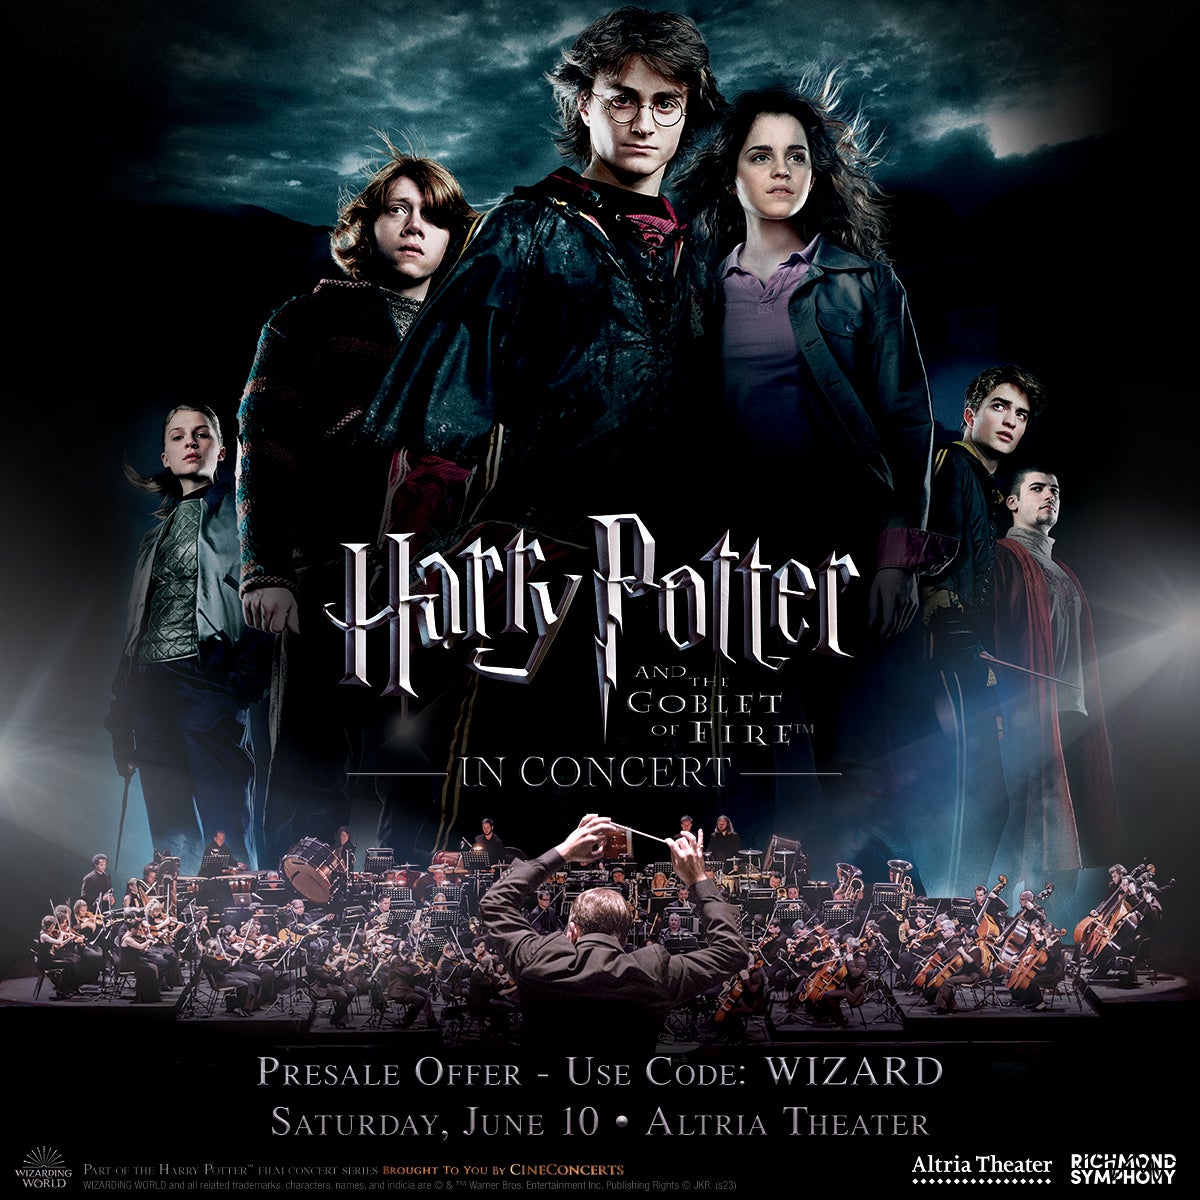 More Info for ALTRIA THEATER ANNOUNCES THE FOURTH INSTALLMENT OF THE HARRY POTTER FILM CONCERT SERIES WITH  HARRY POTTER AND THE GOBLET OF FIRE™ IN CONCERT